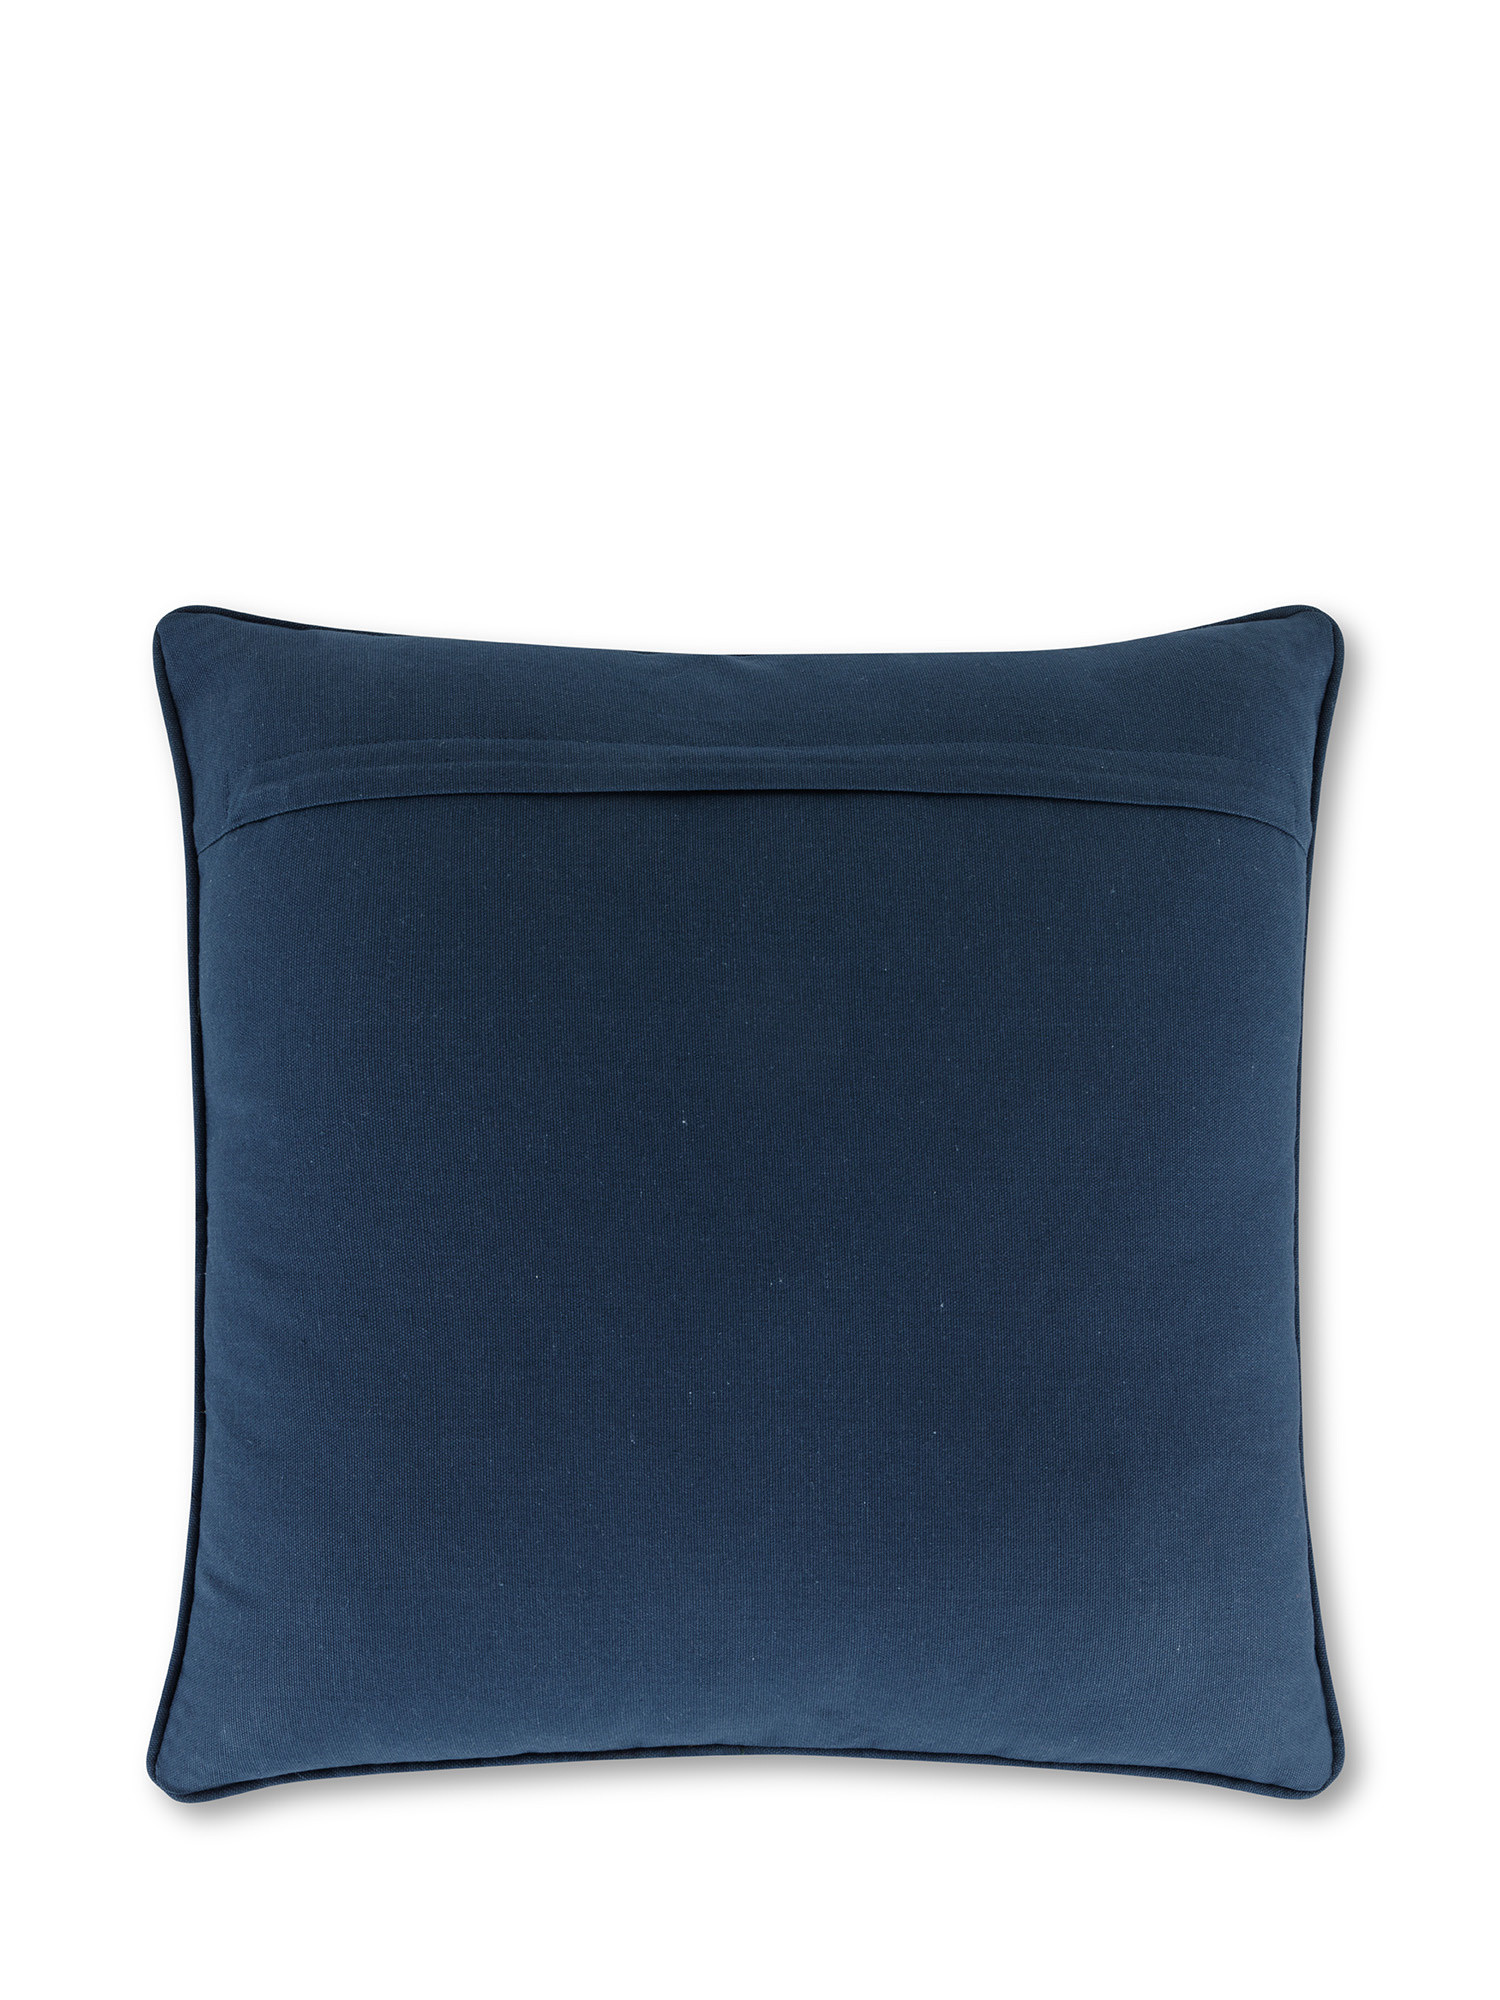 Cushion with embroidered leaves 45x45 cm, Dark Blue, large image number 1